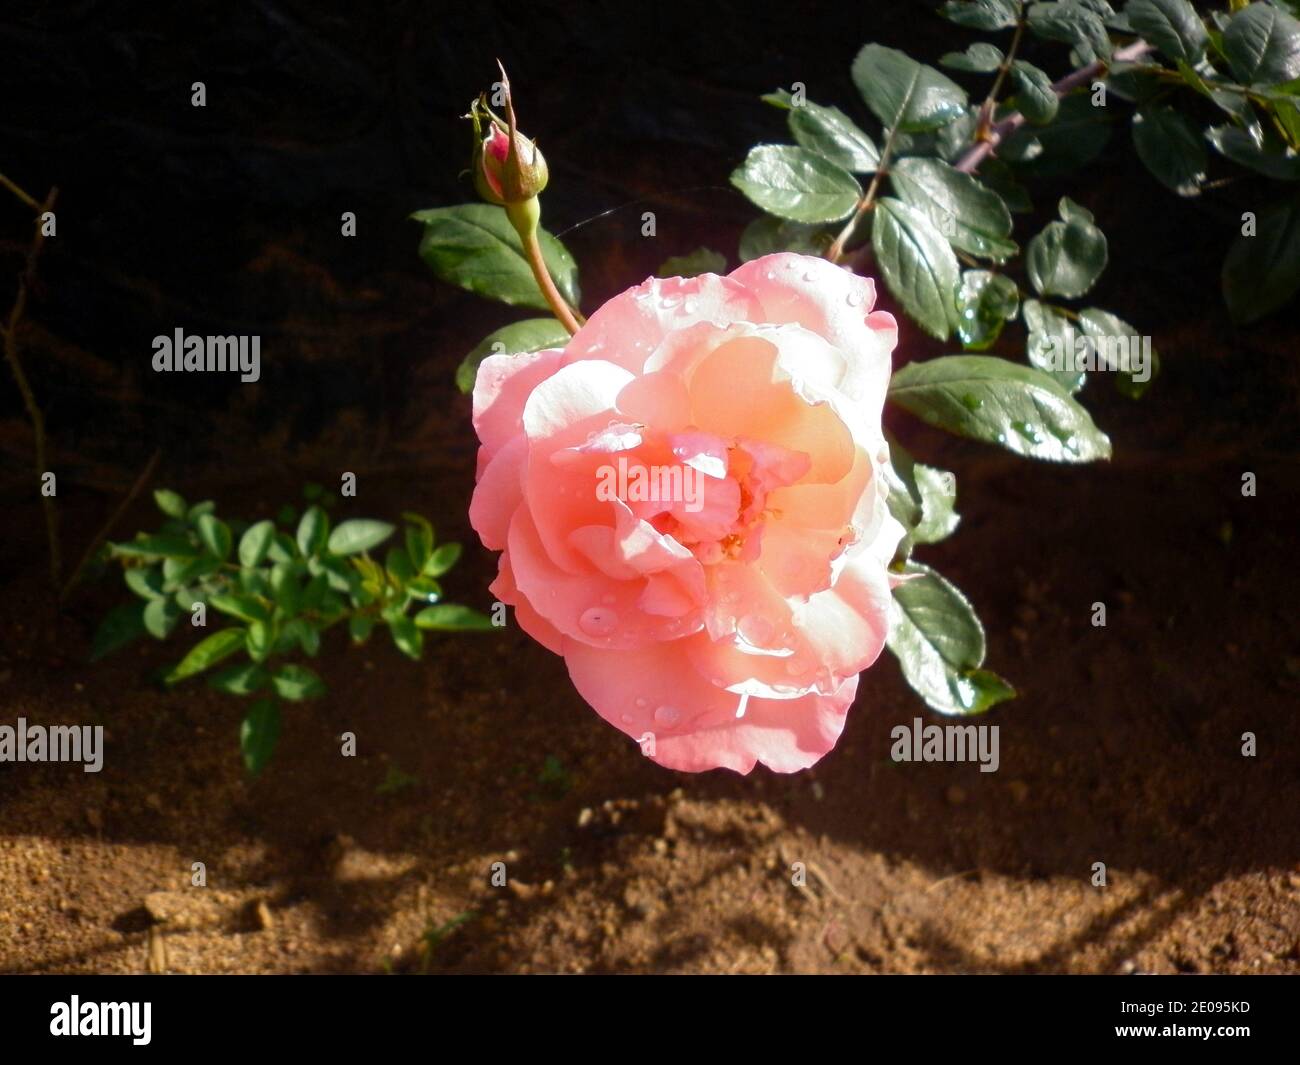 A pink color rose flower and rose bud in the garden Stock Photo